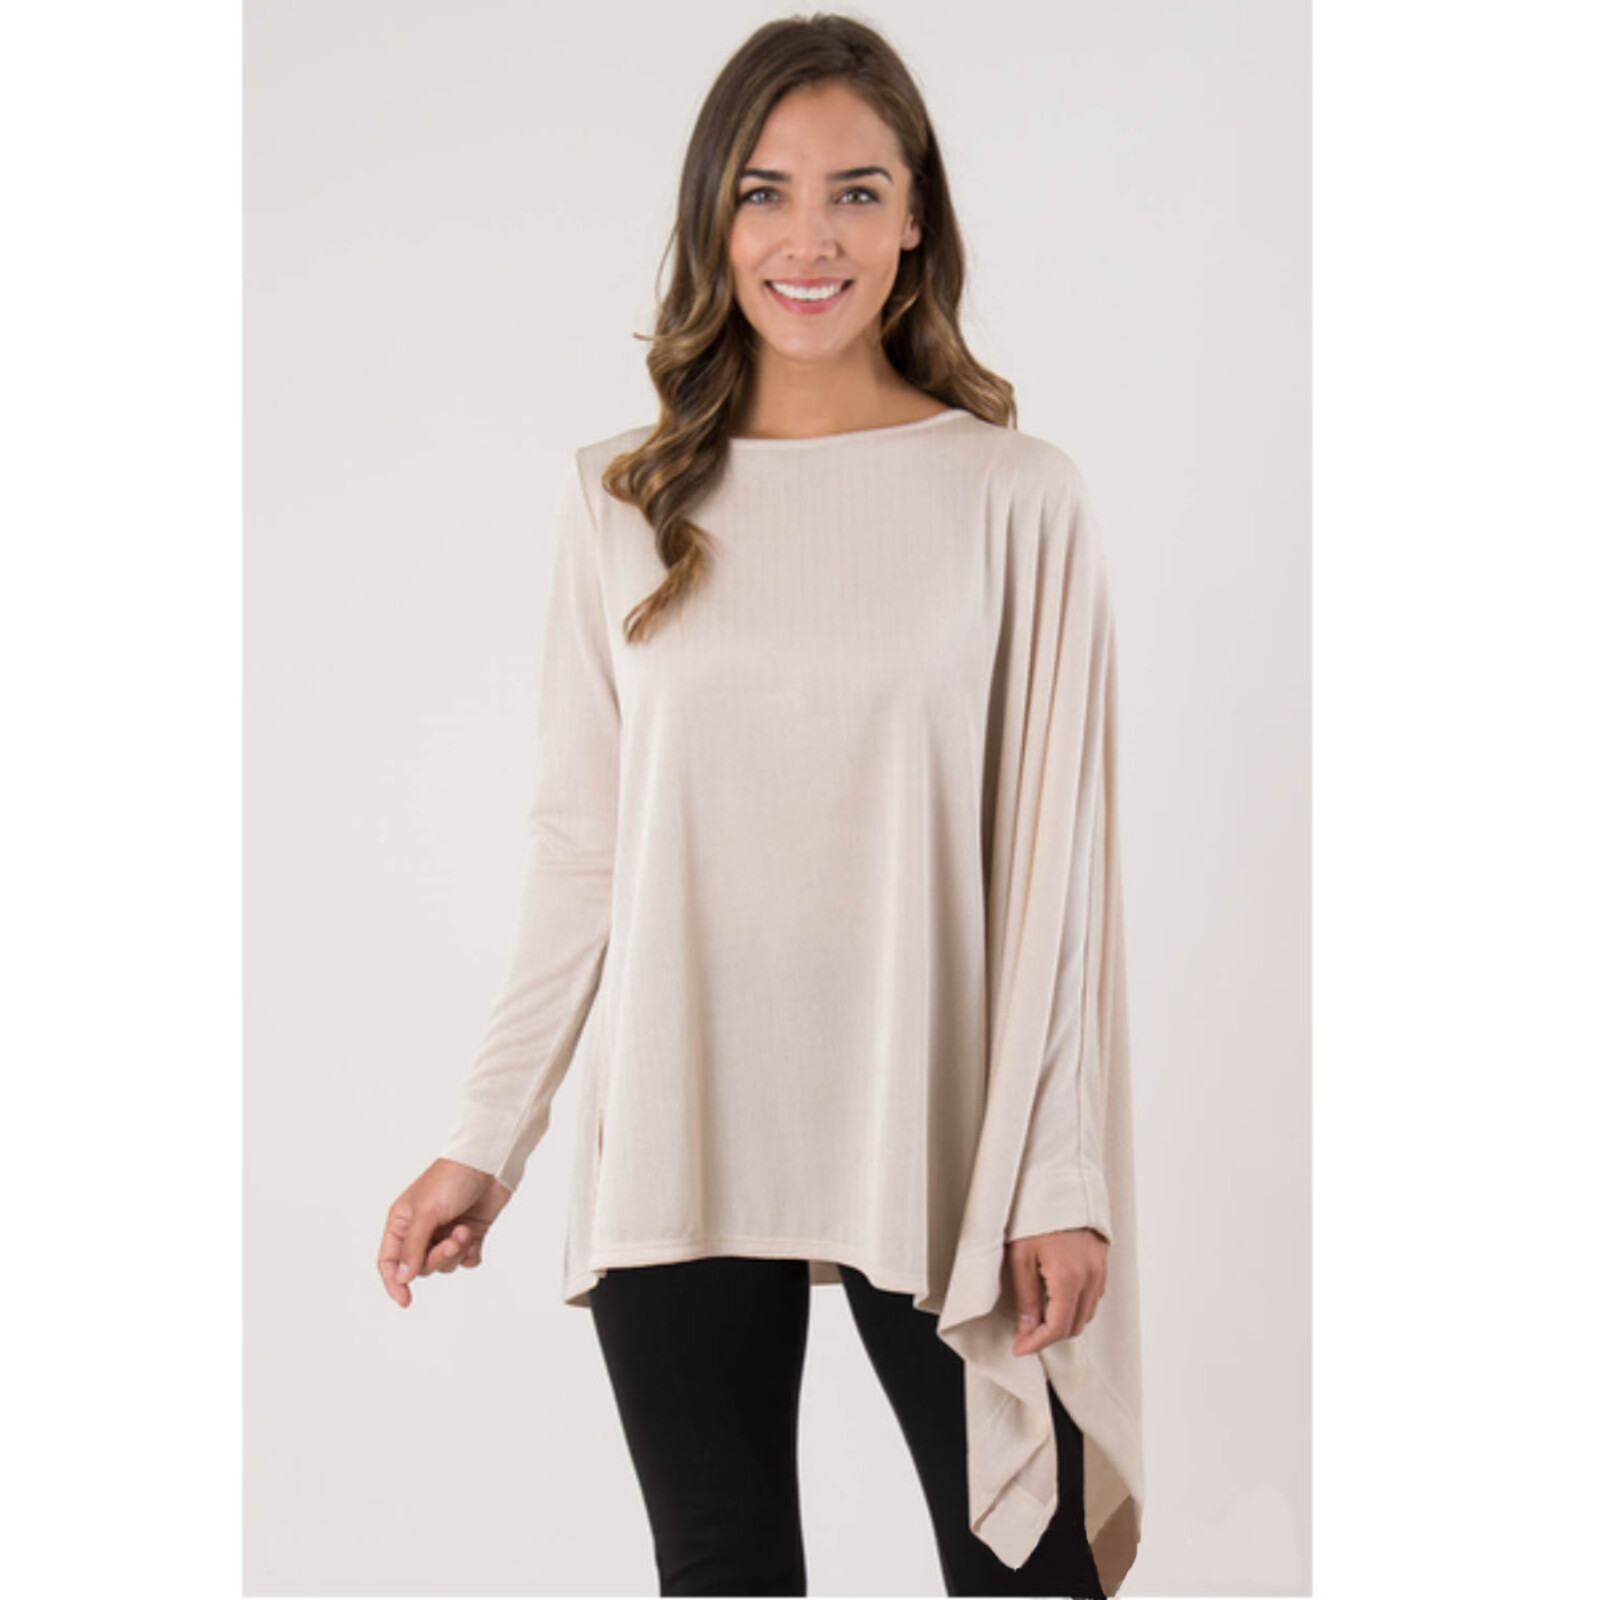 Simply Noelle Cape Sleeve Top - L/XL     TOP8001LX loading=